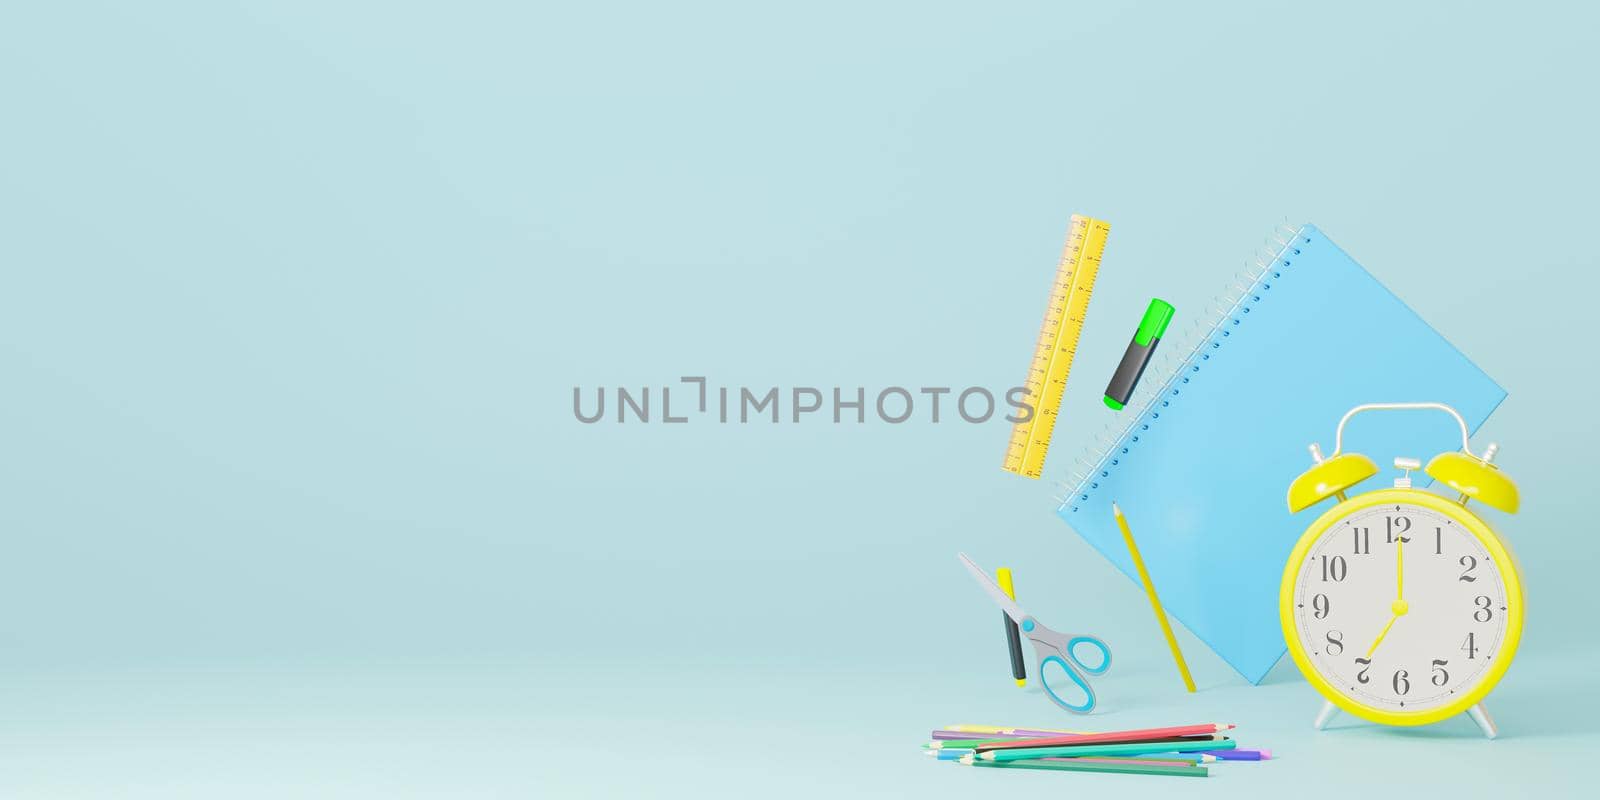 School stationery items on blue background with free space for text. Creative, colourful background with school supplies. Banner with copy space. Ruler, pencil, scissors, alarm clock. 3D rendering